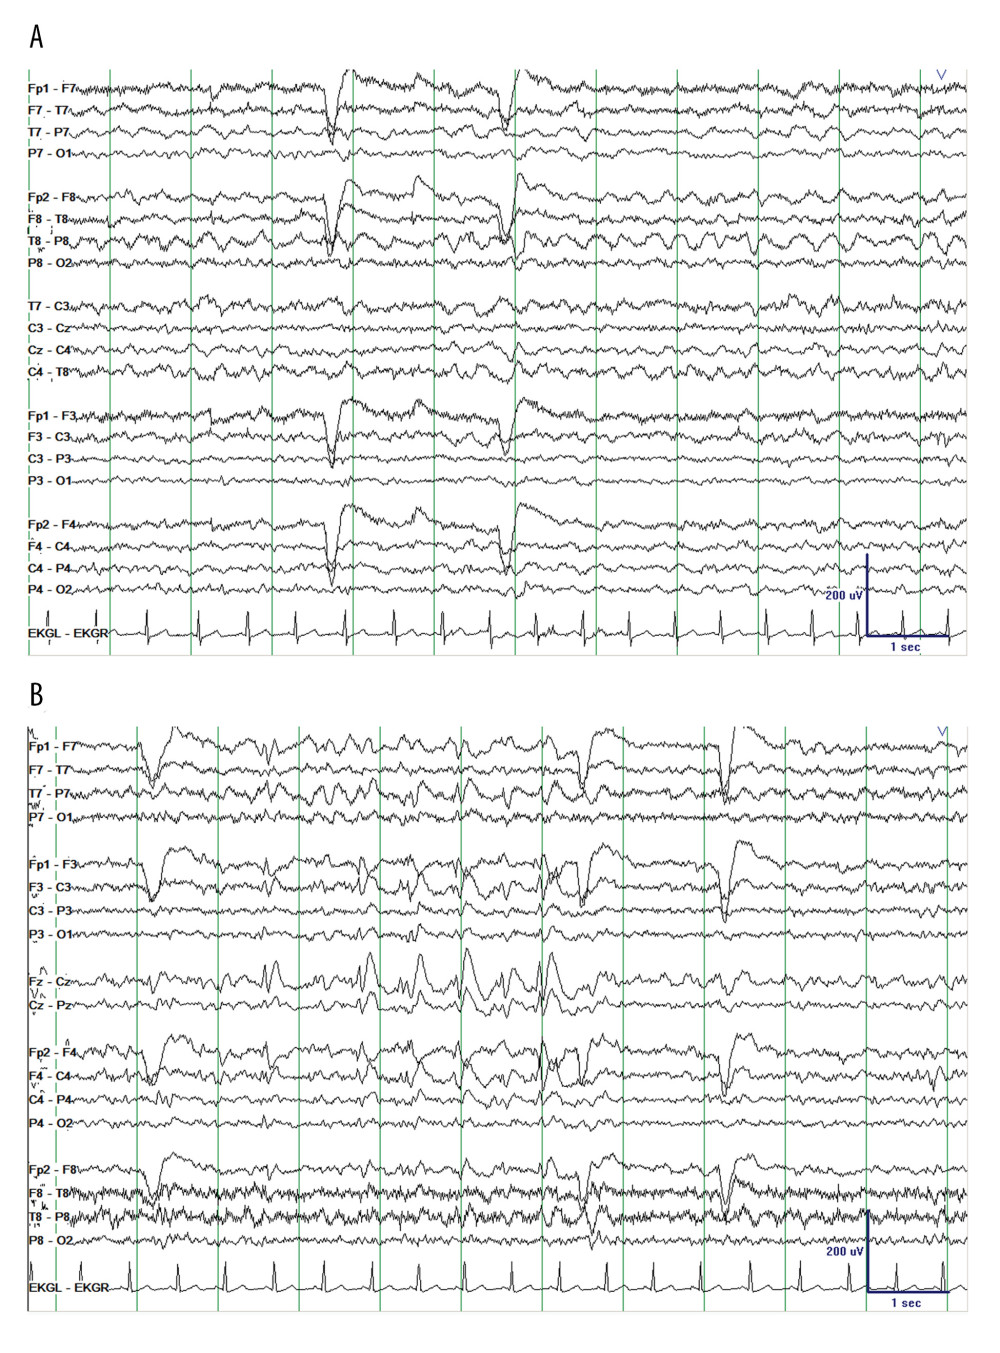 Electroencephalography (longitudinal bipolar montage, sensitivity 10 μV/mm) on presentation demonstrating (A) mild diffuse background slowing with (B) occasional bifronto-centrally predominant sharp and spike wave discharges, frequently occurring in (very) brief runs without ictal evolution and primarily observed in wakefulness and N1 sleep.